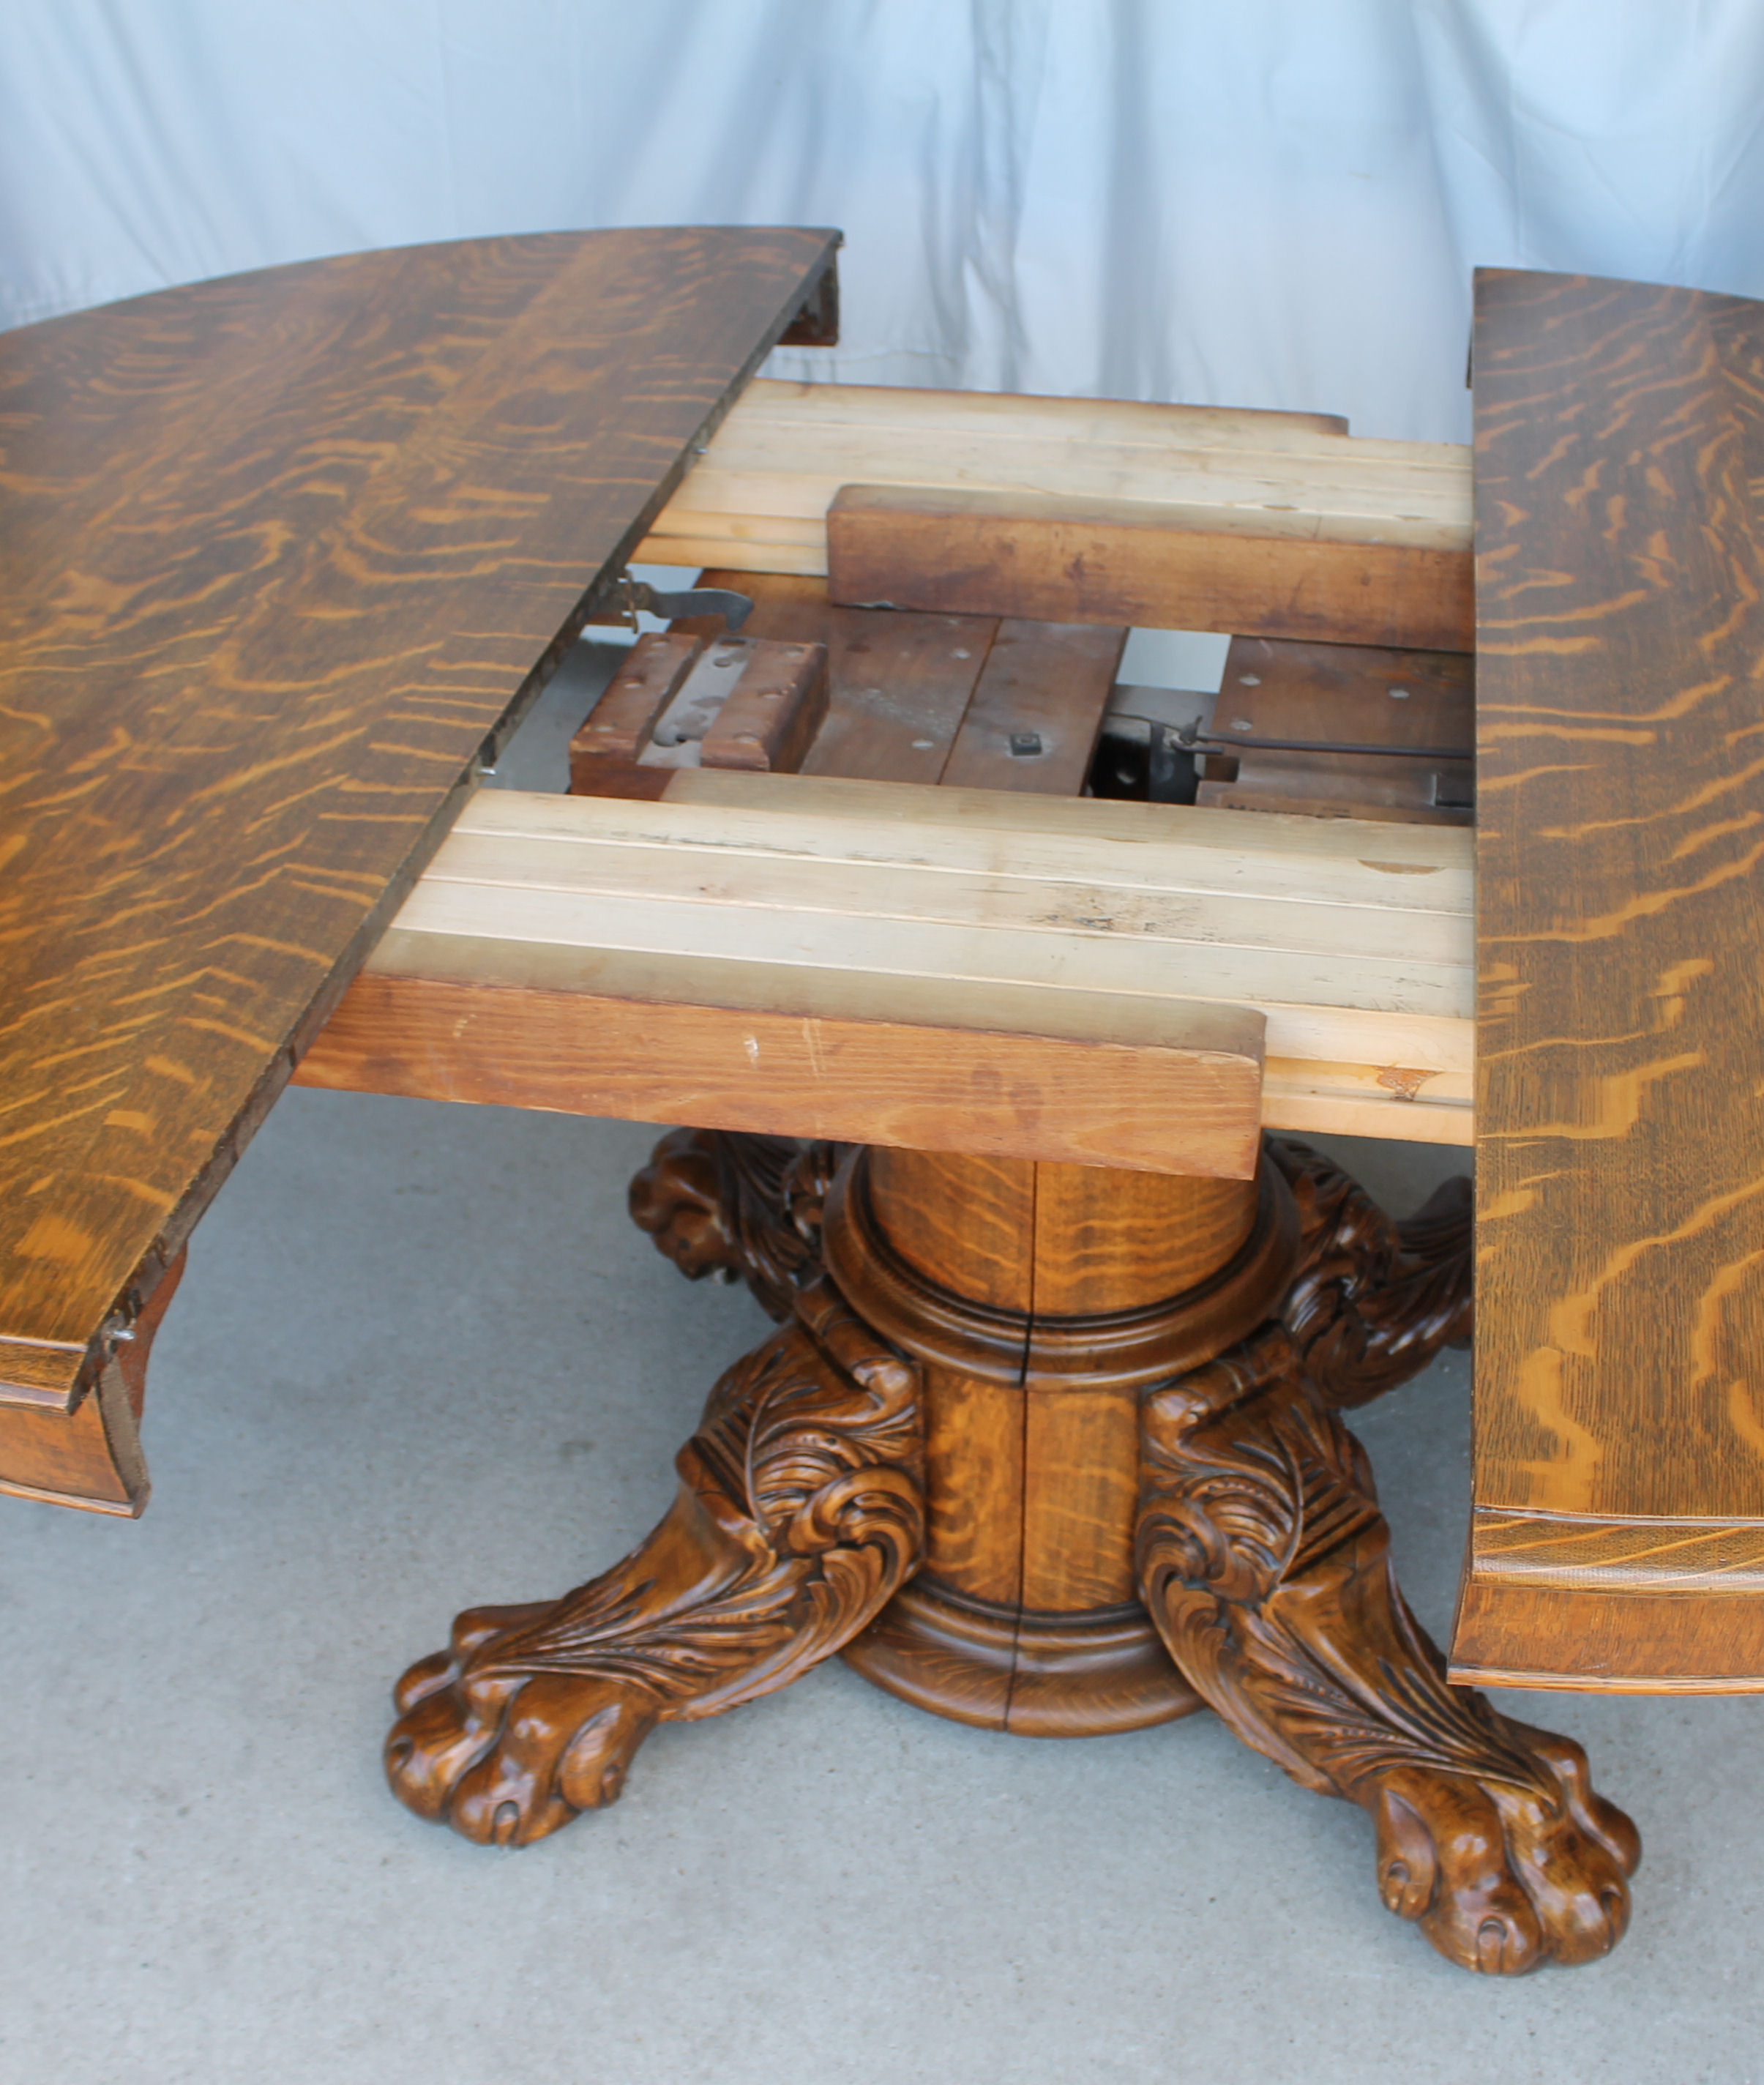 Bargain John's Antiques | Round Oak Dining Table - large carved claw